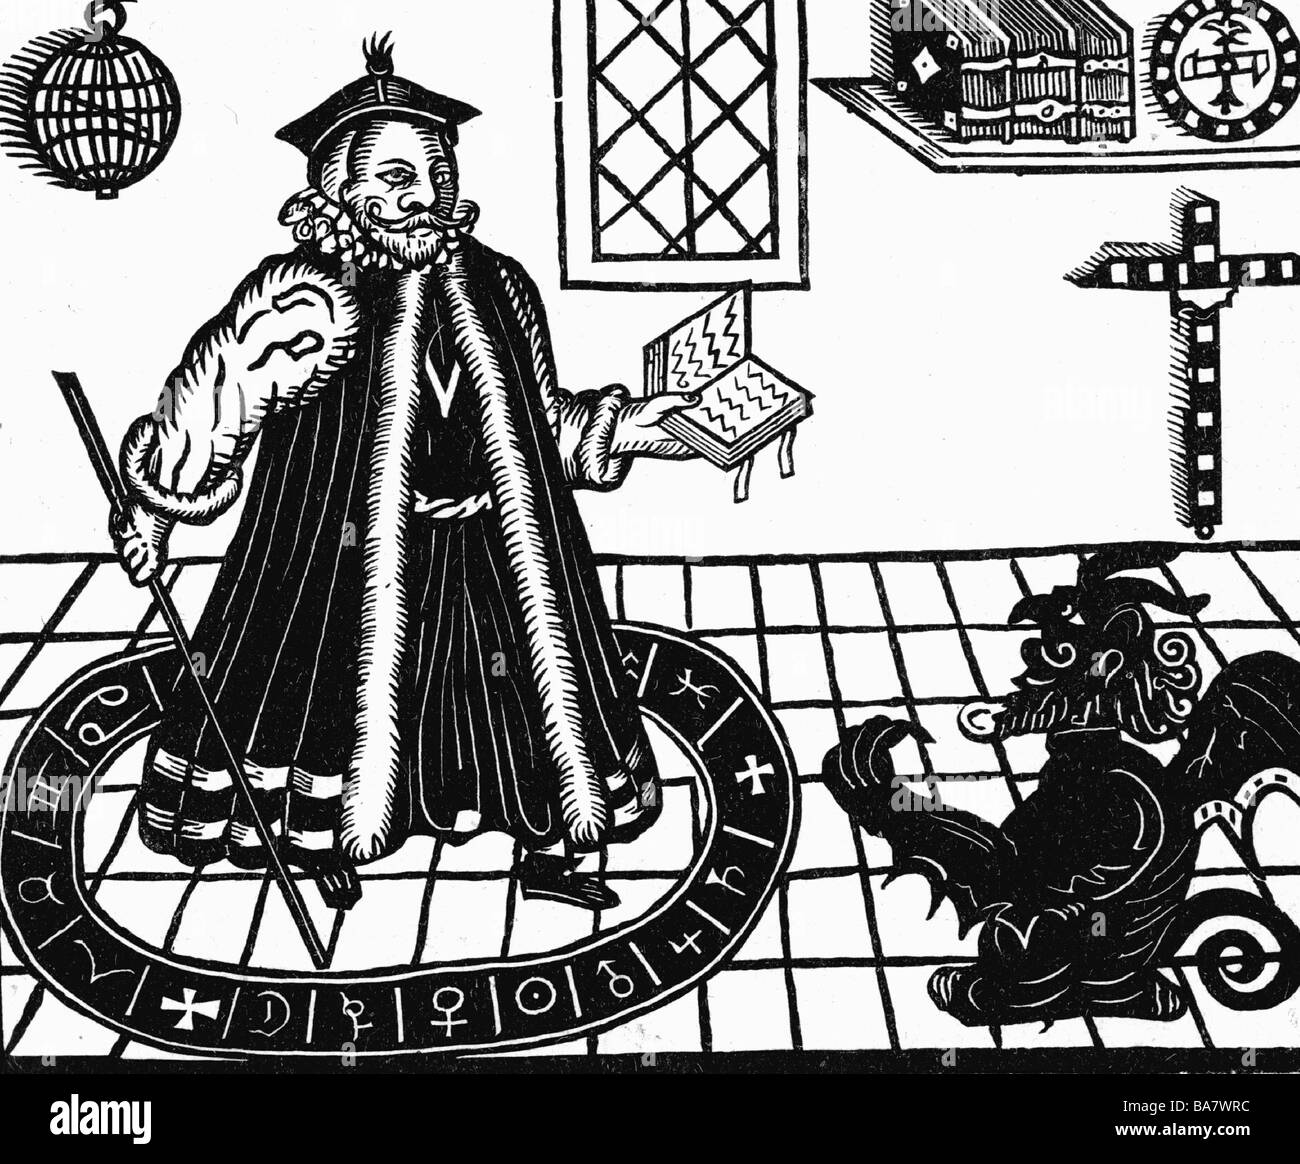 Marlowe, Christopher, 6.2.1564 - 30.5.1593, British dramatist, work, detail from 'The Tragical History of the Life and Death of Doctor Faustus', London, 1636, Stock Photo